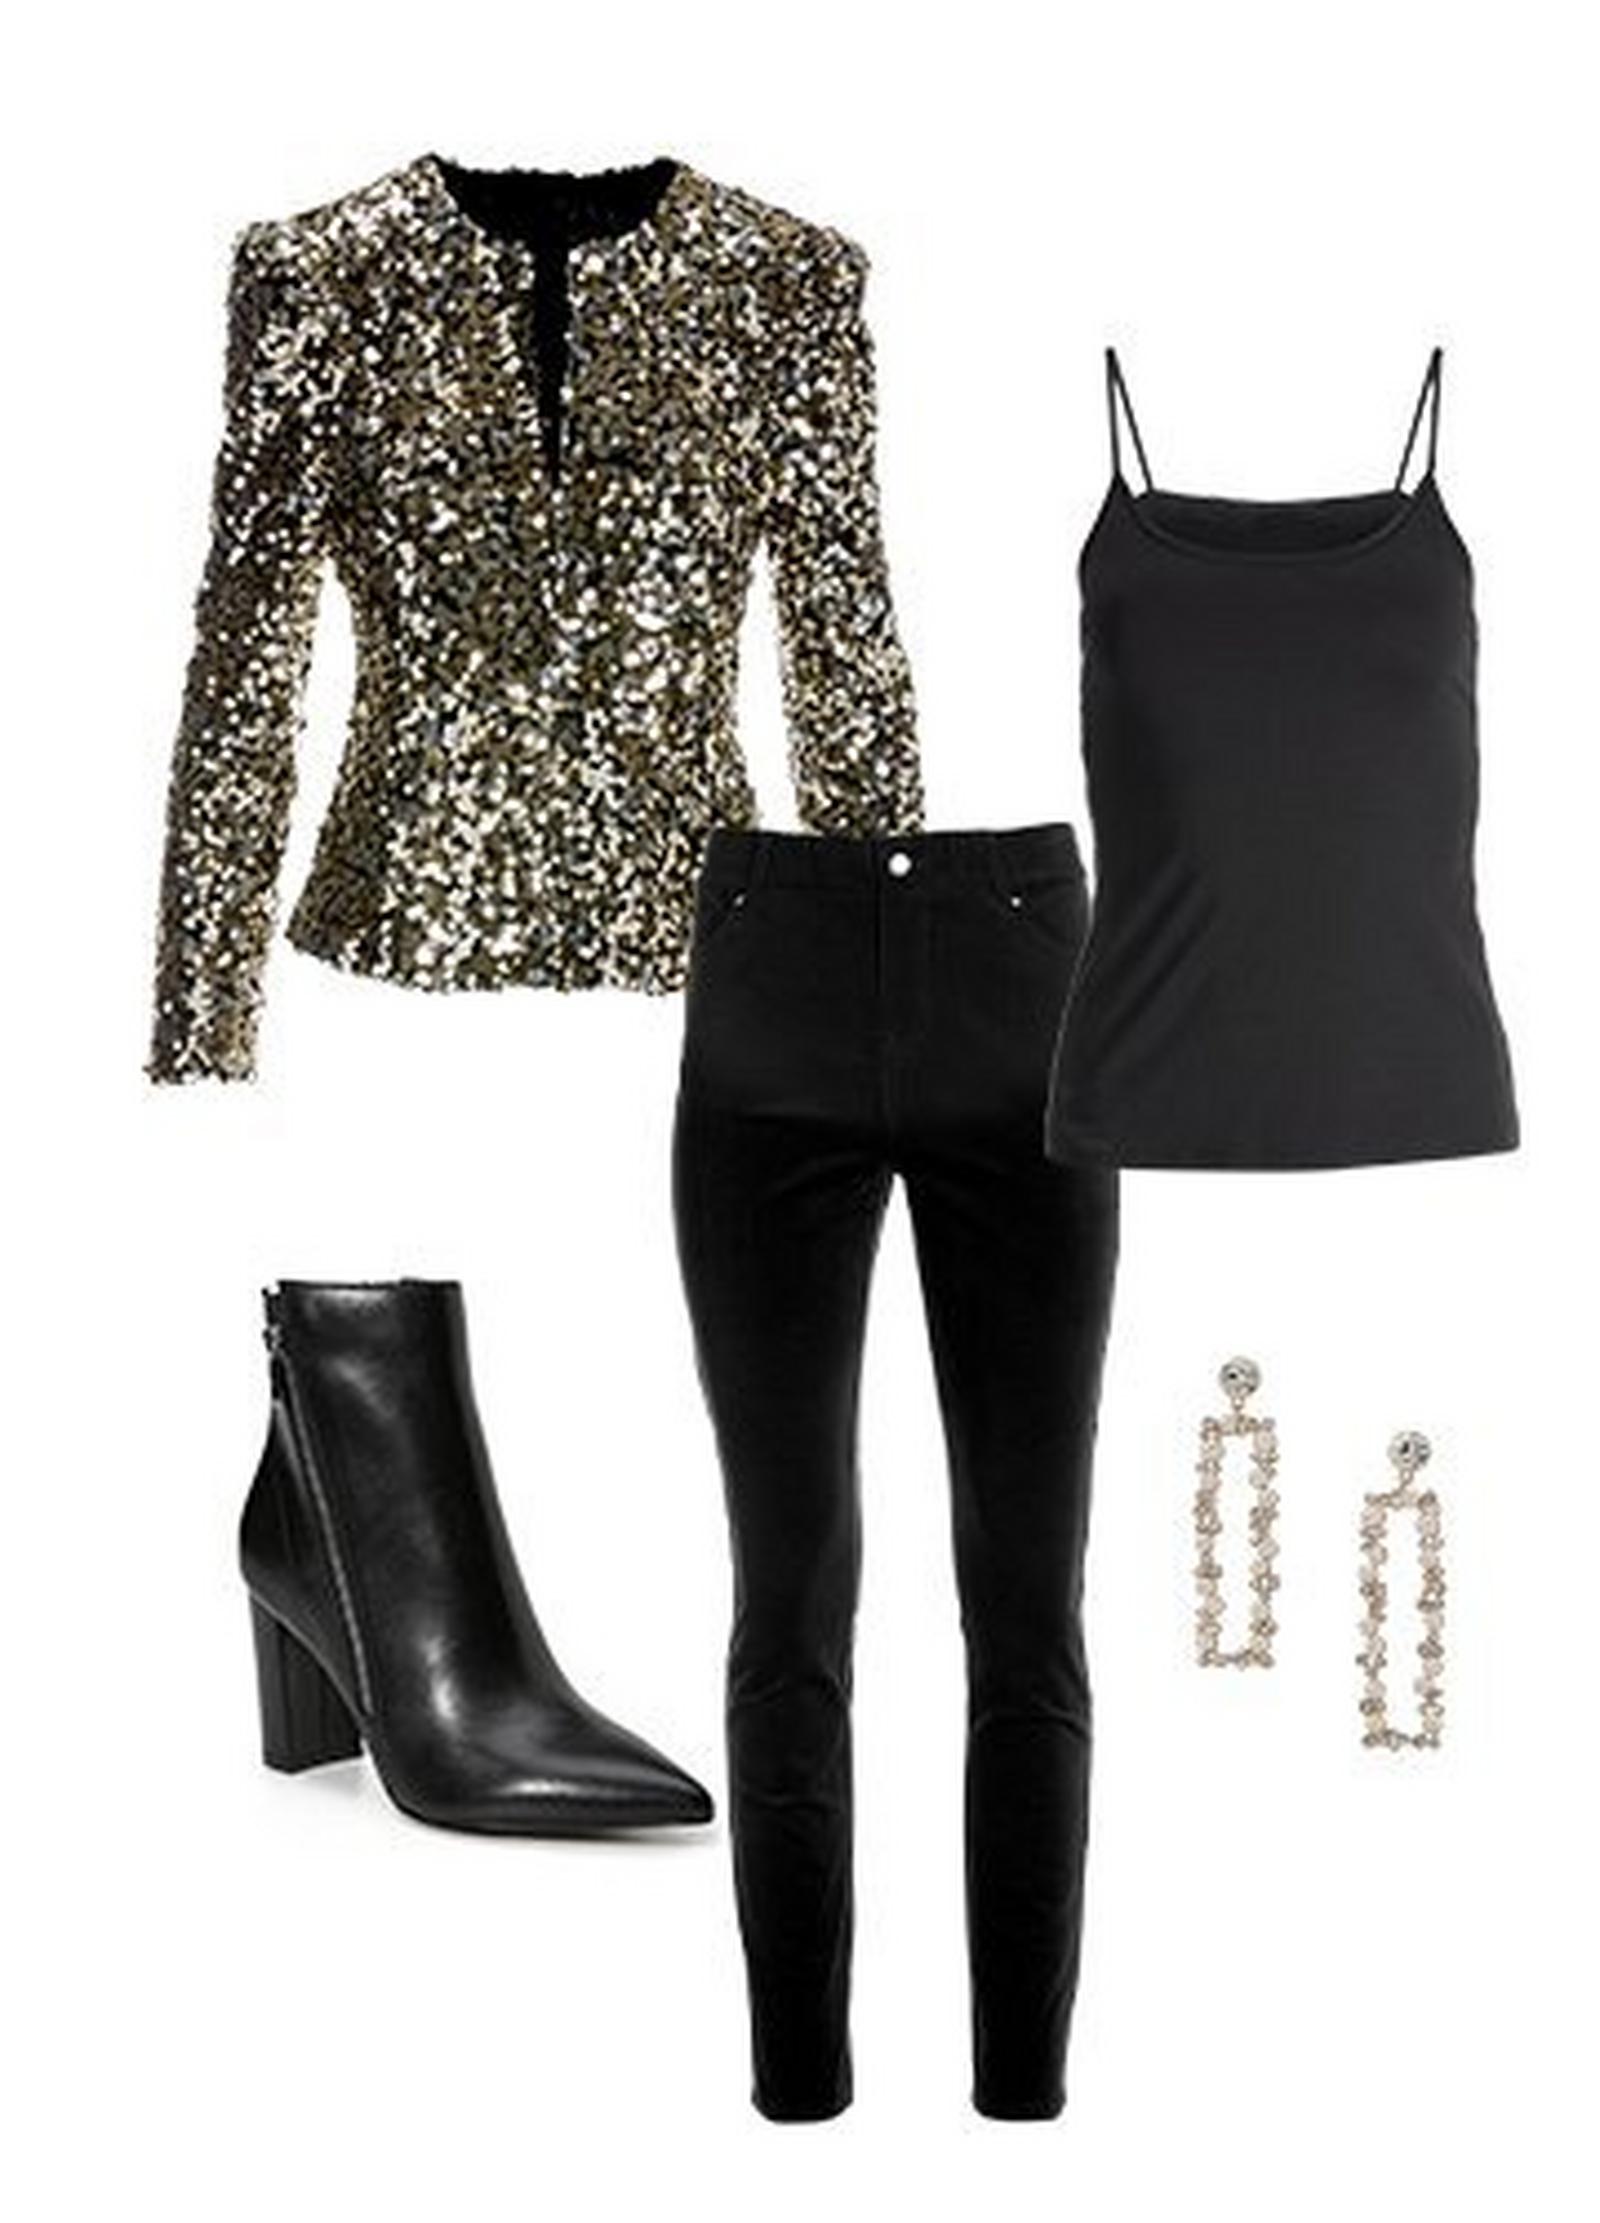 gold and silver sequin jacket, black tank top, black velvet pants, pearl rectangle earrings, and black leather booties.